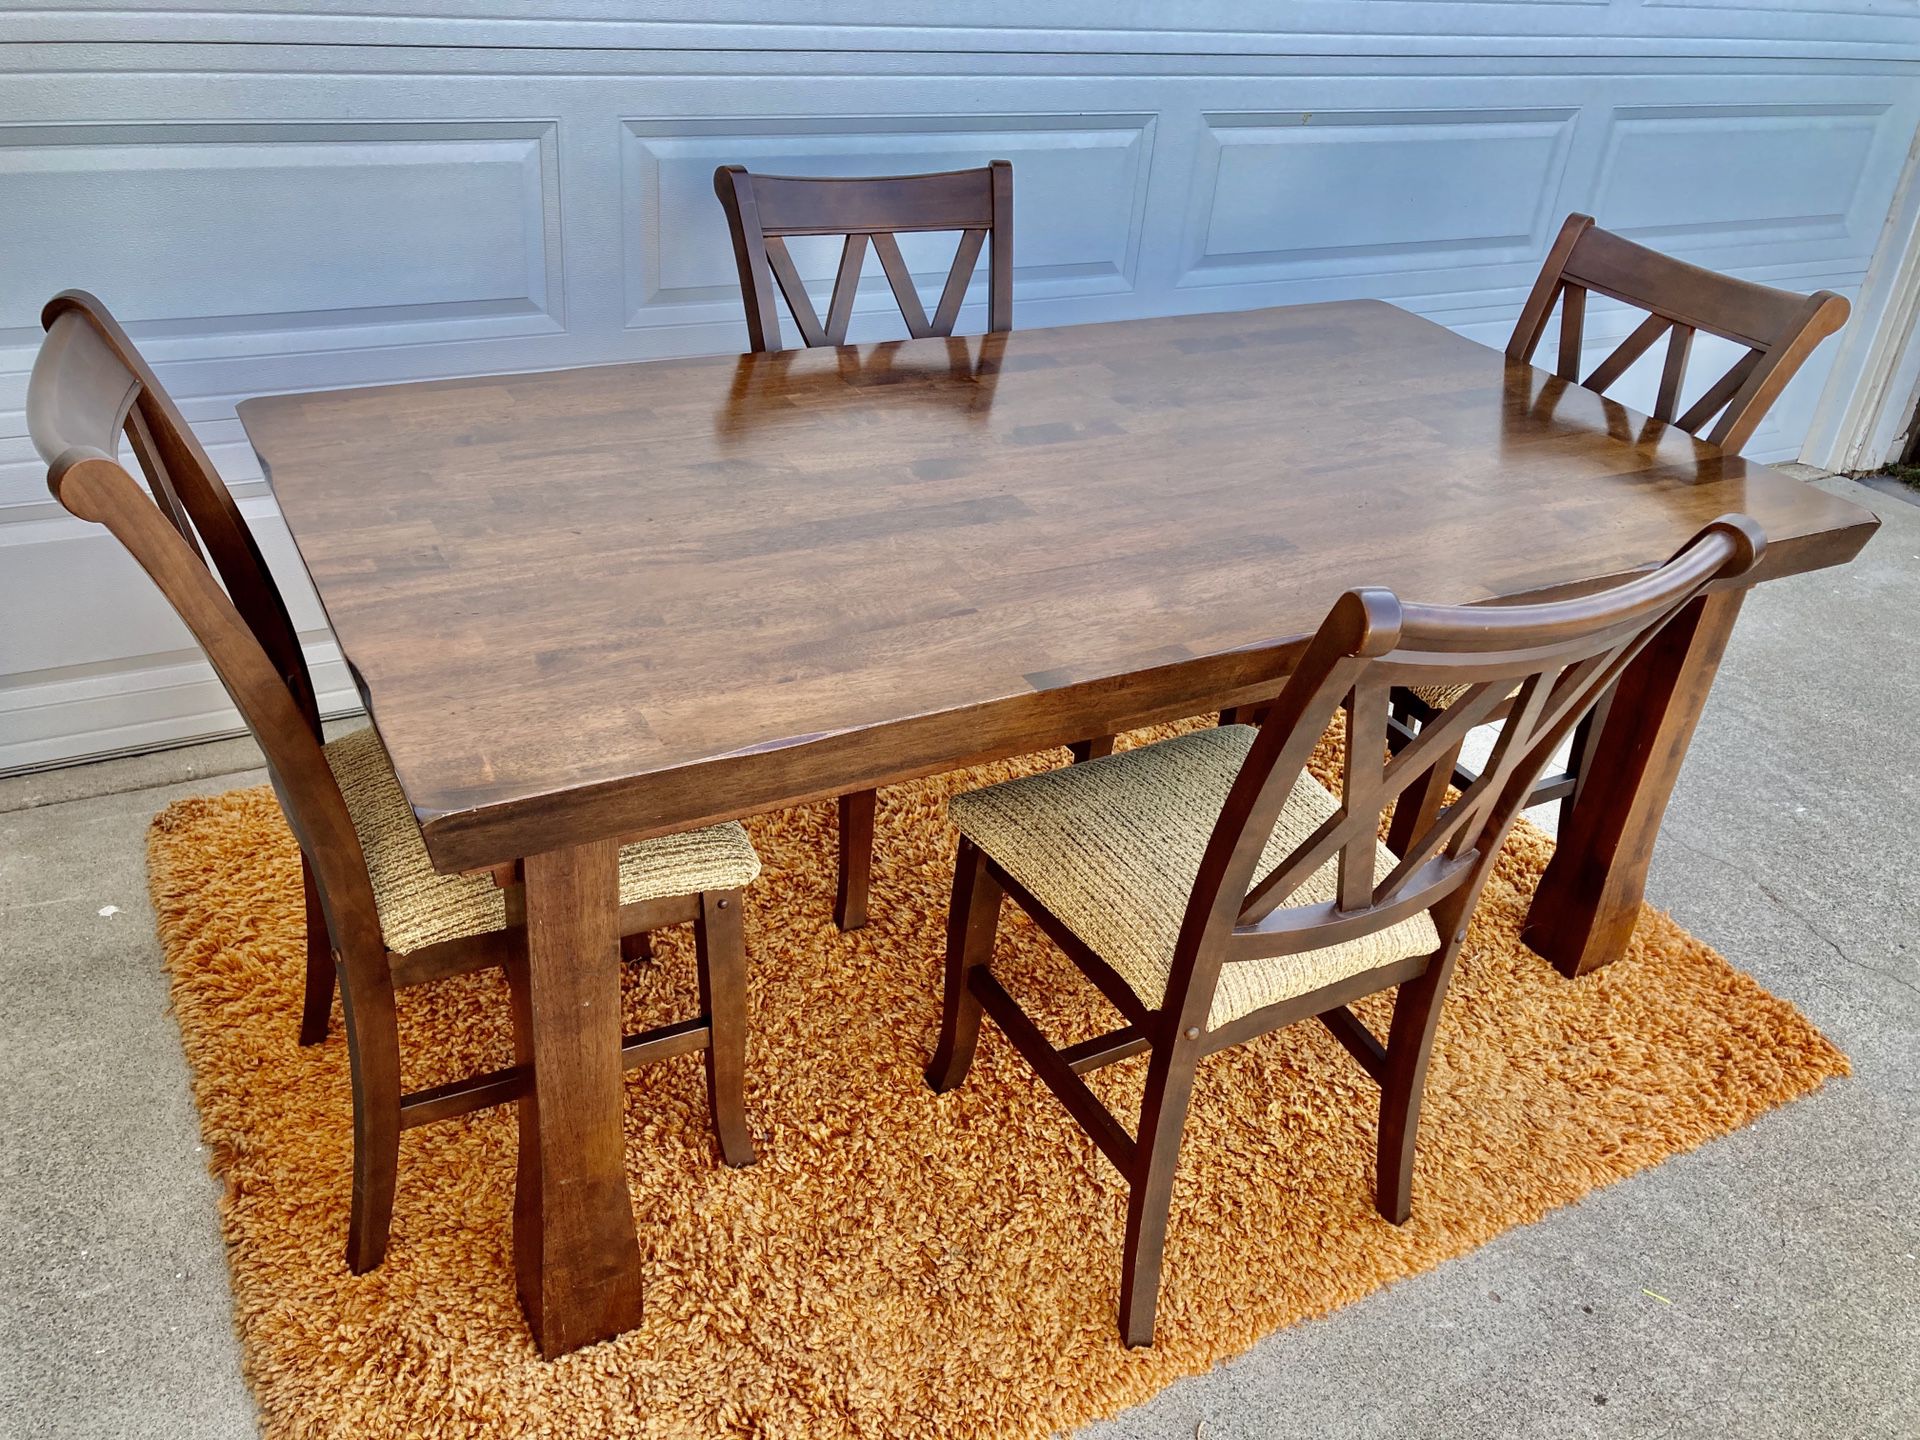 World market Dining Table & 4 chairs